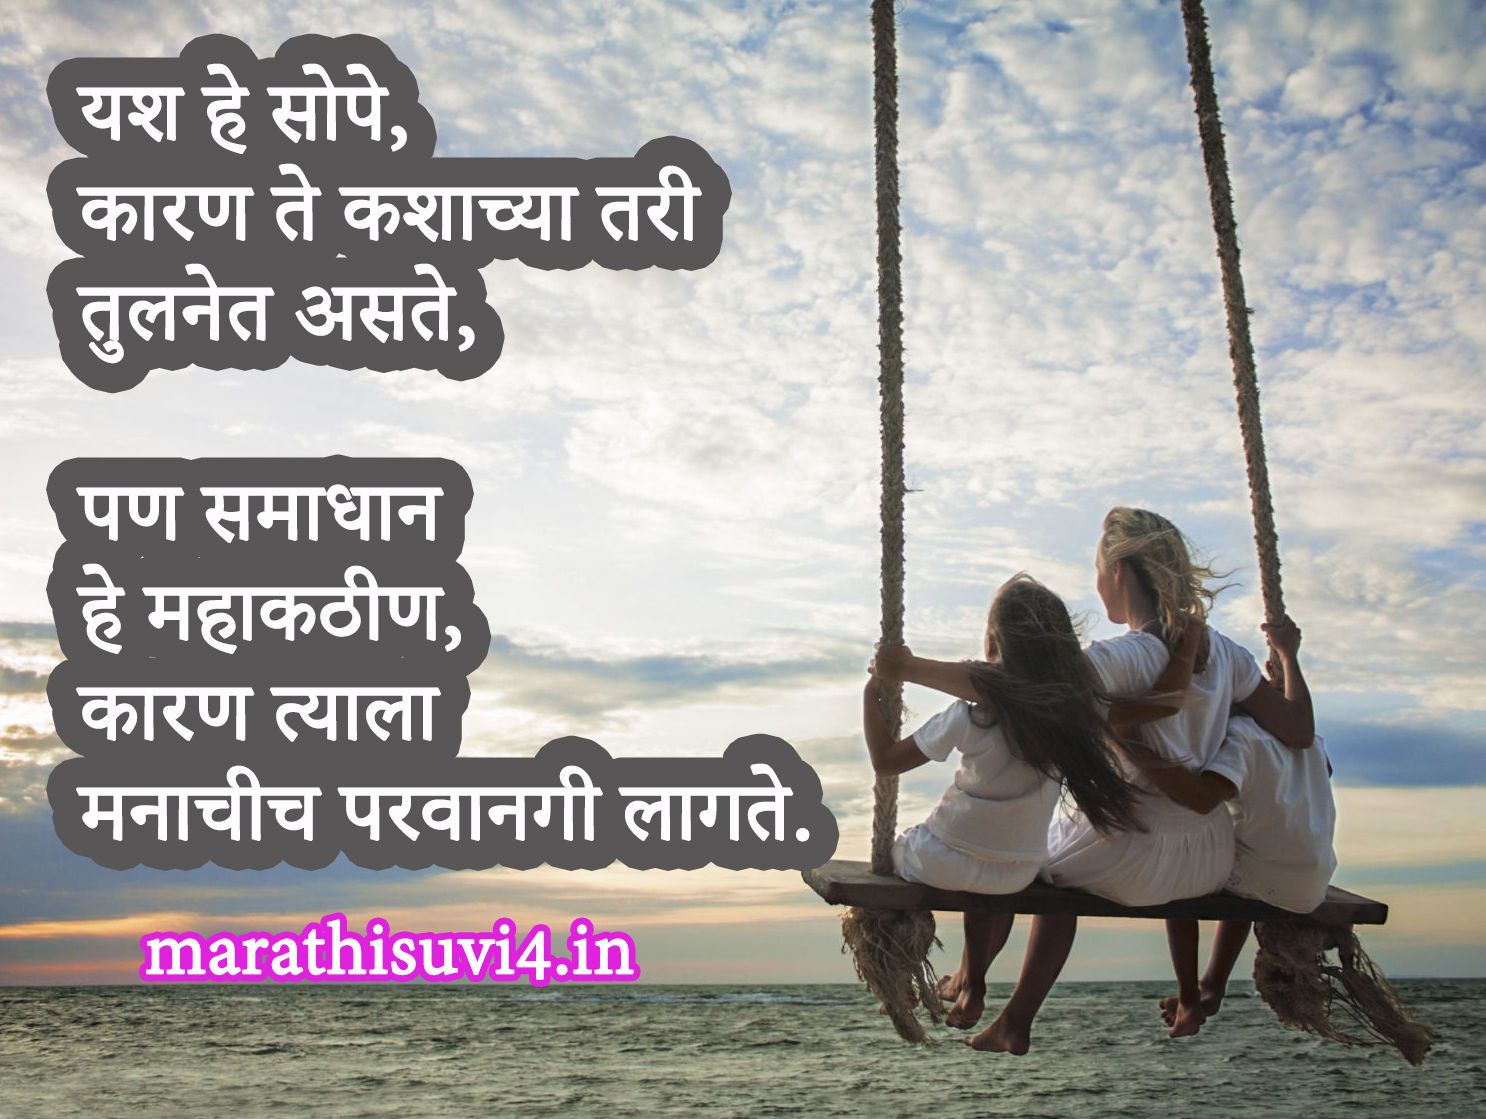 Peace Mind Quotes in marathi images of Peace Mind Quotes Quotes About Peace Mind Popular Inspirational quotes in marathi Human Mind Quotes great